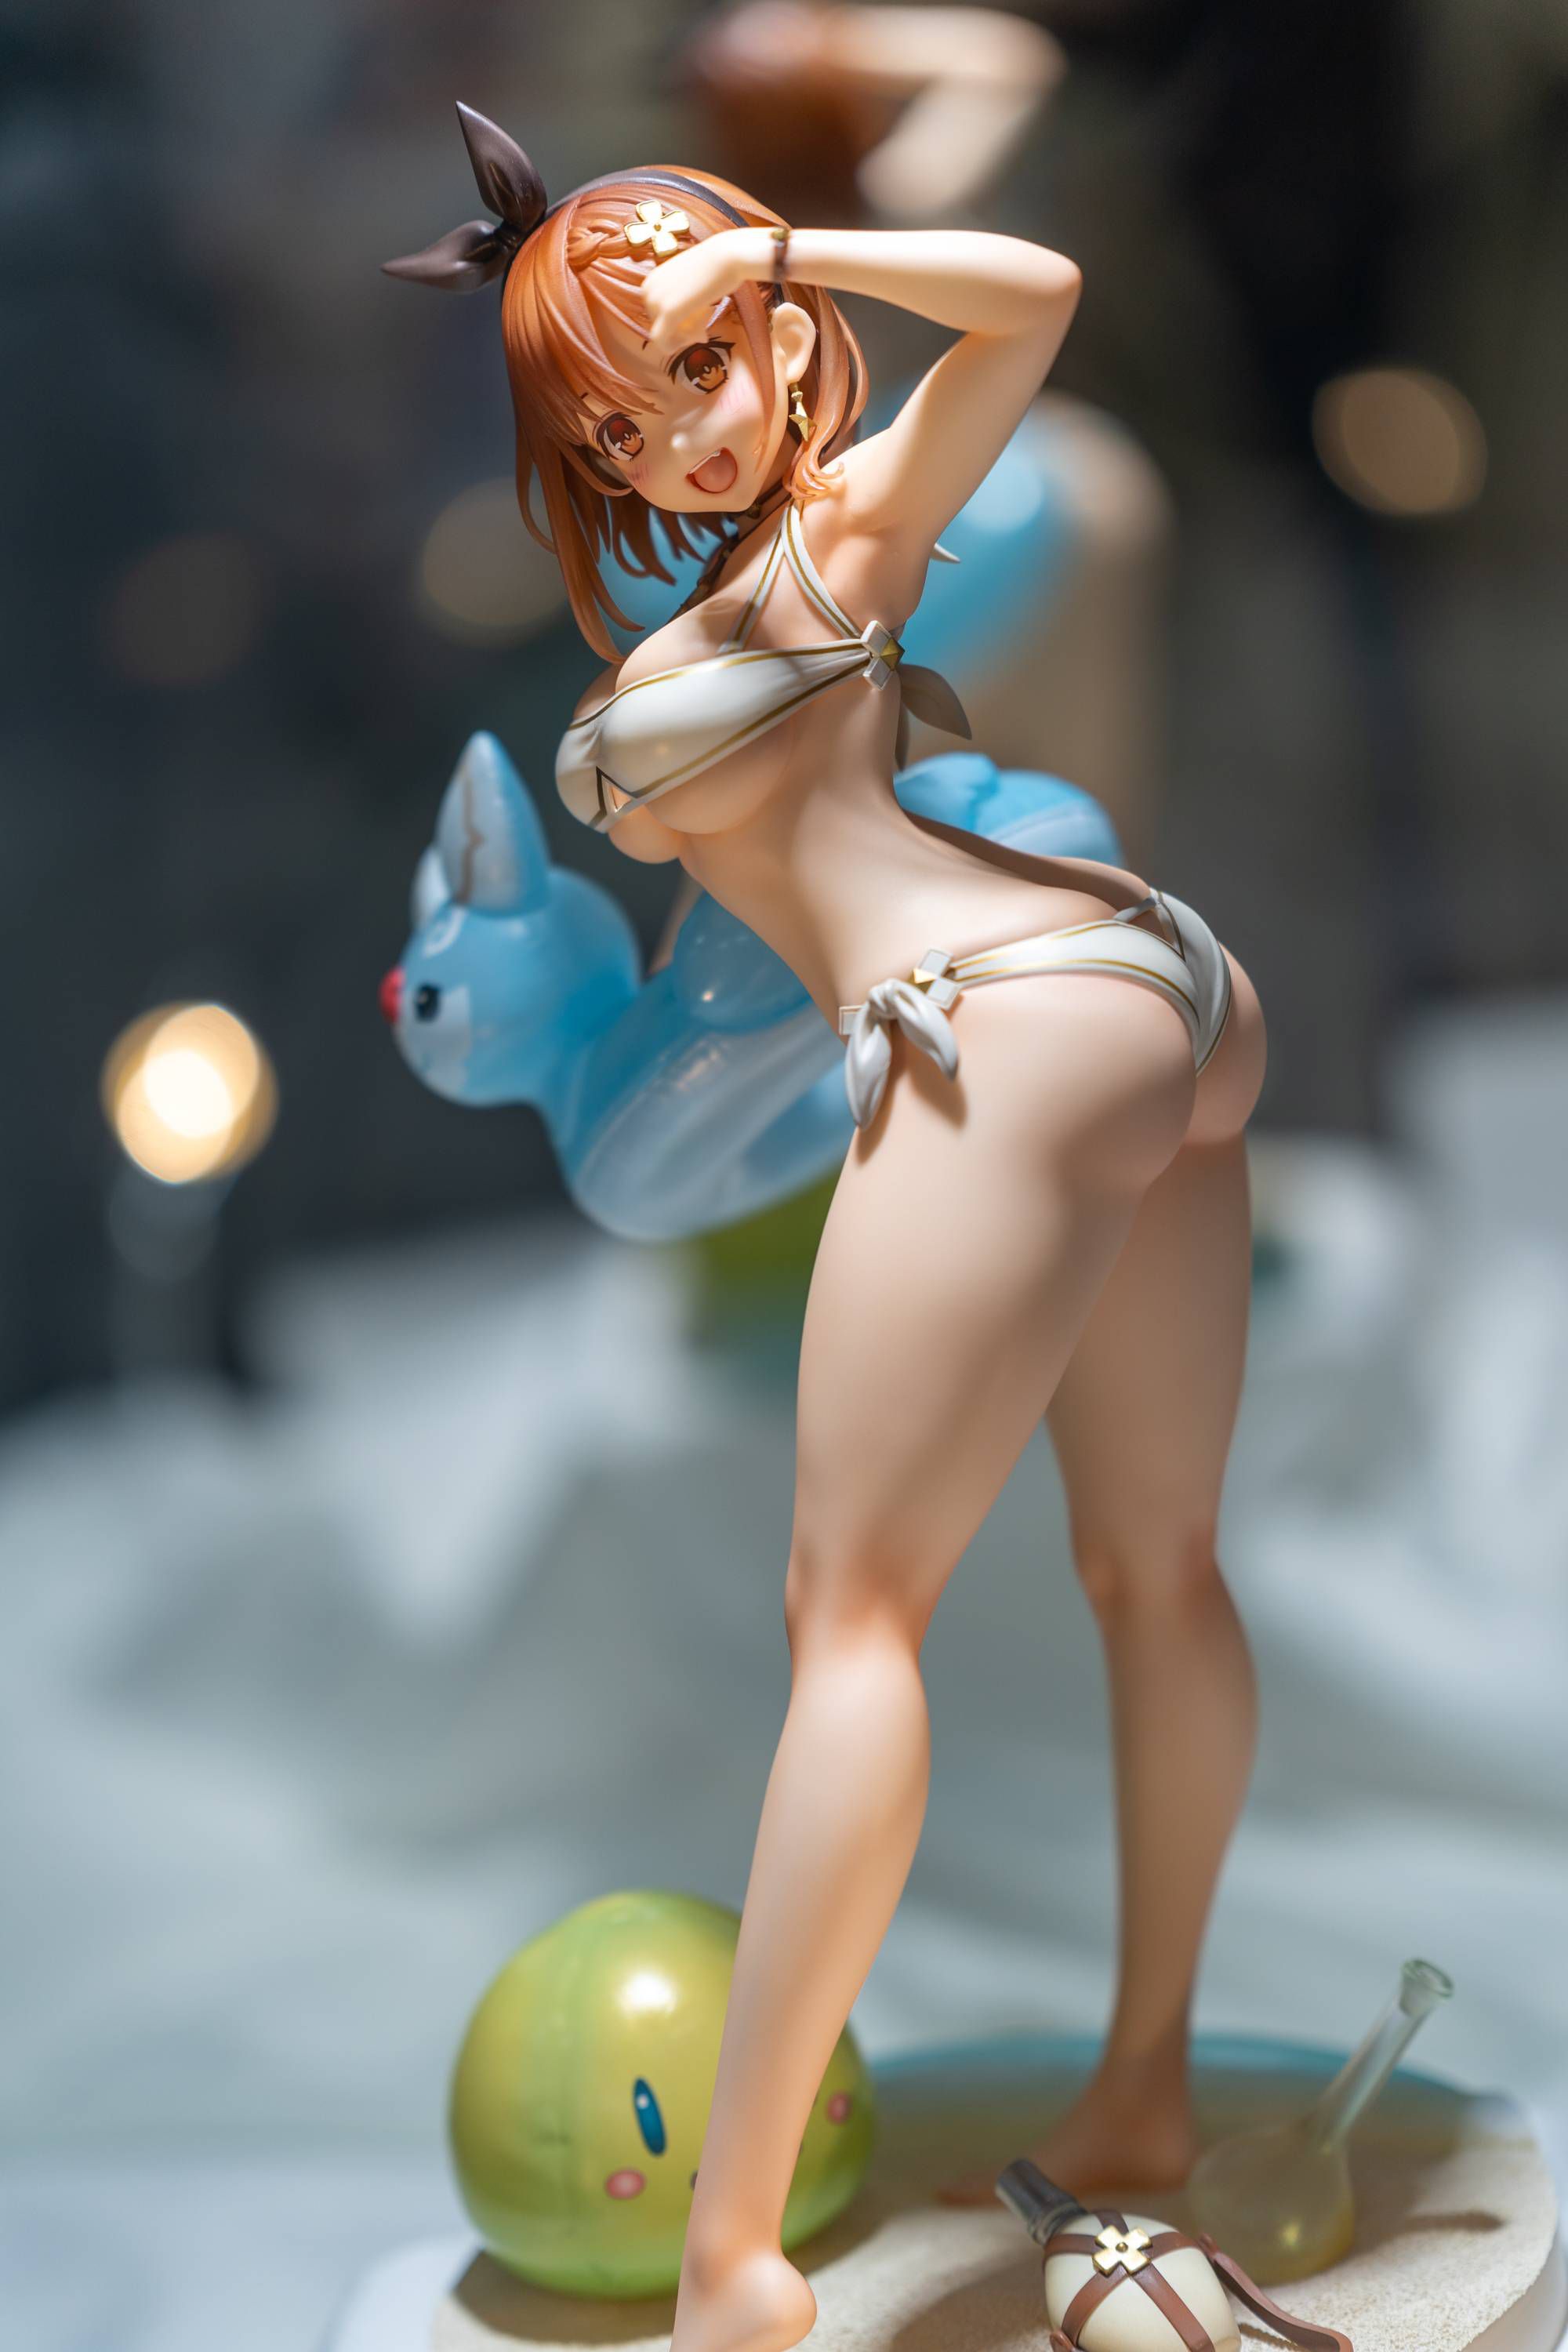 【Image】New figure wwwwwwww too etch called "Change of clothes riser" 7